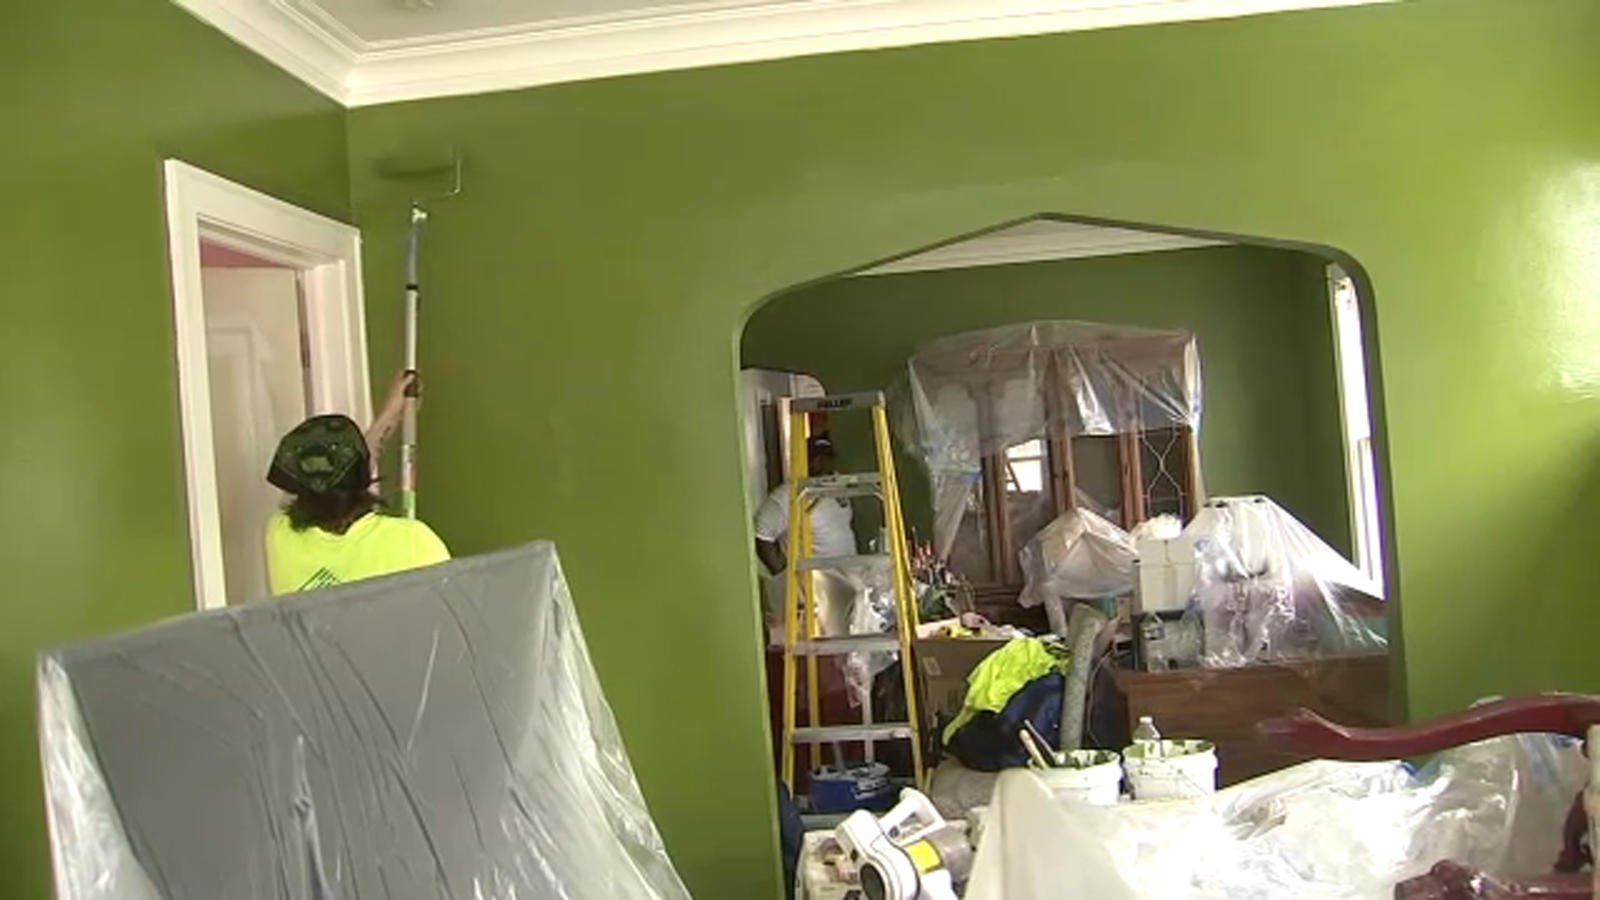 Rebuilding Together Metro Chicago volunteers make critical home repairs in Englewood, Chicago on National Rebuilding Day [Video]